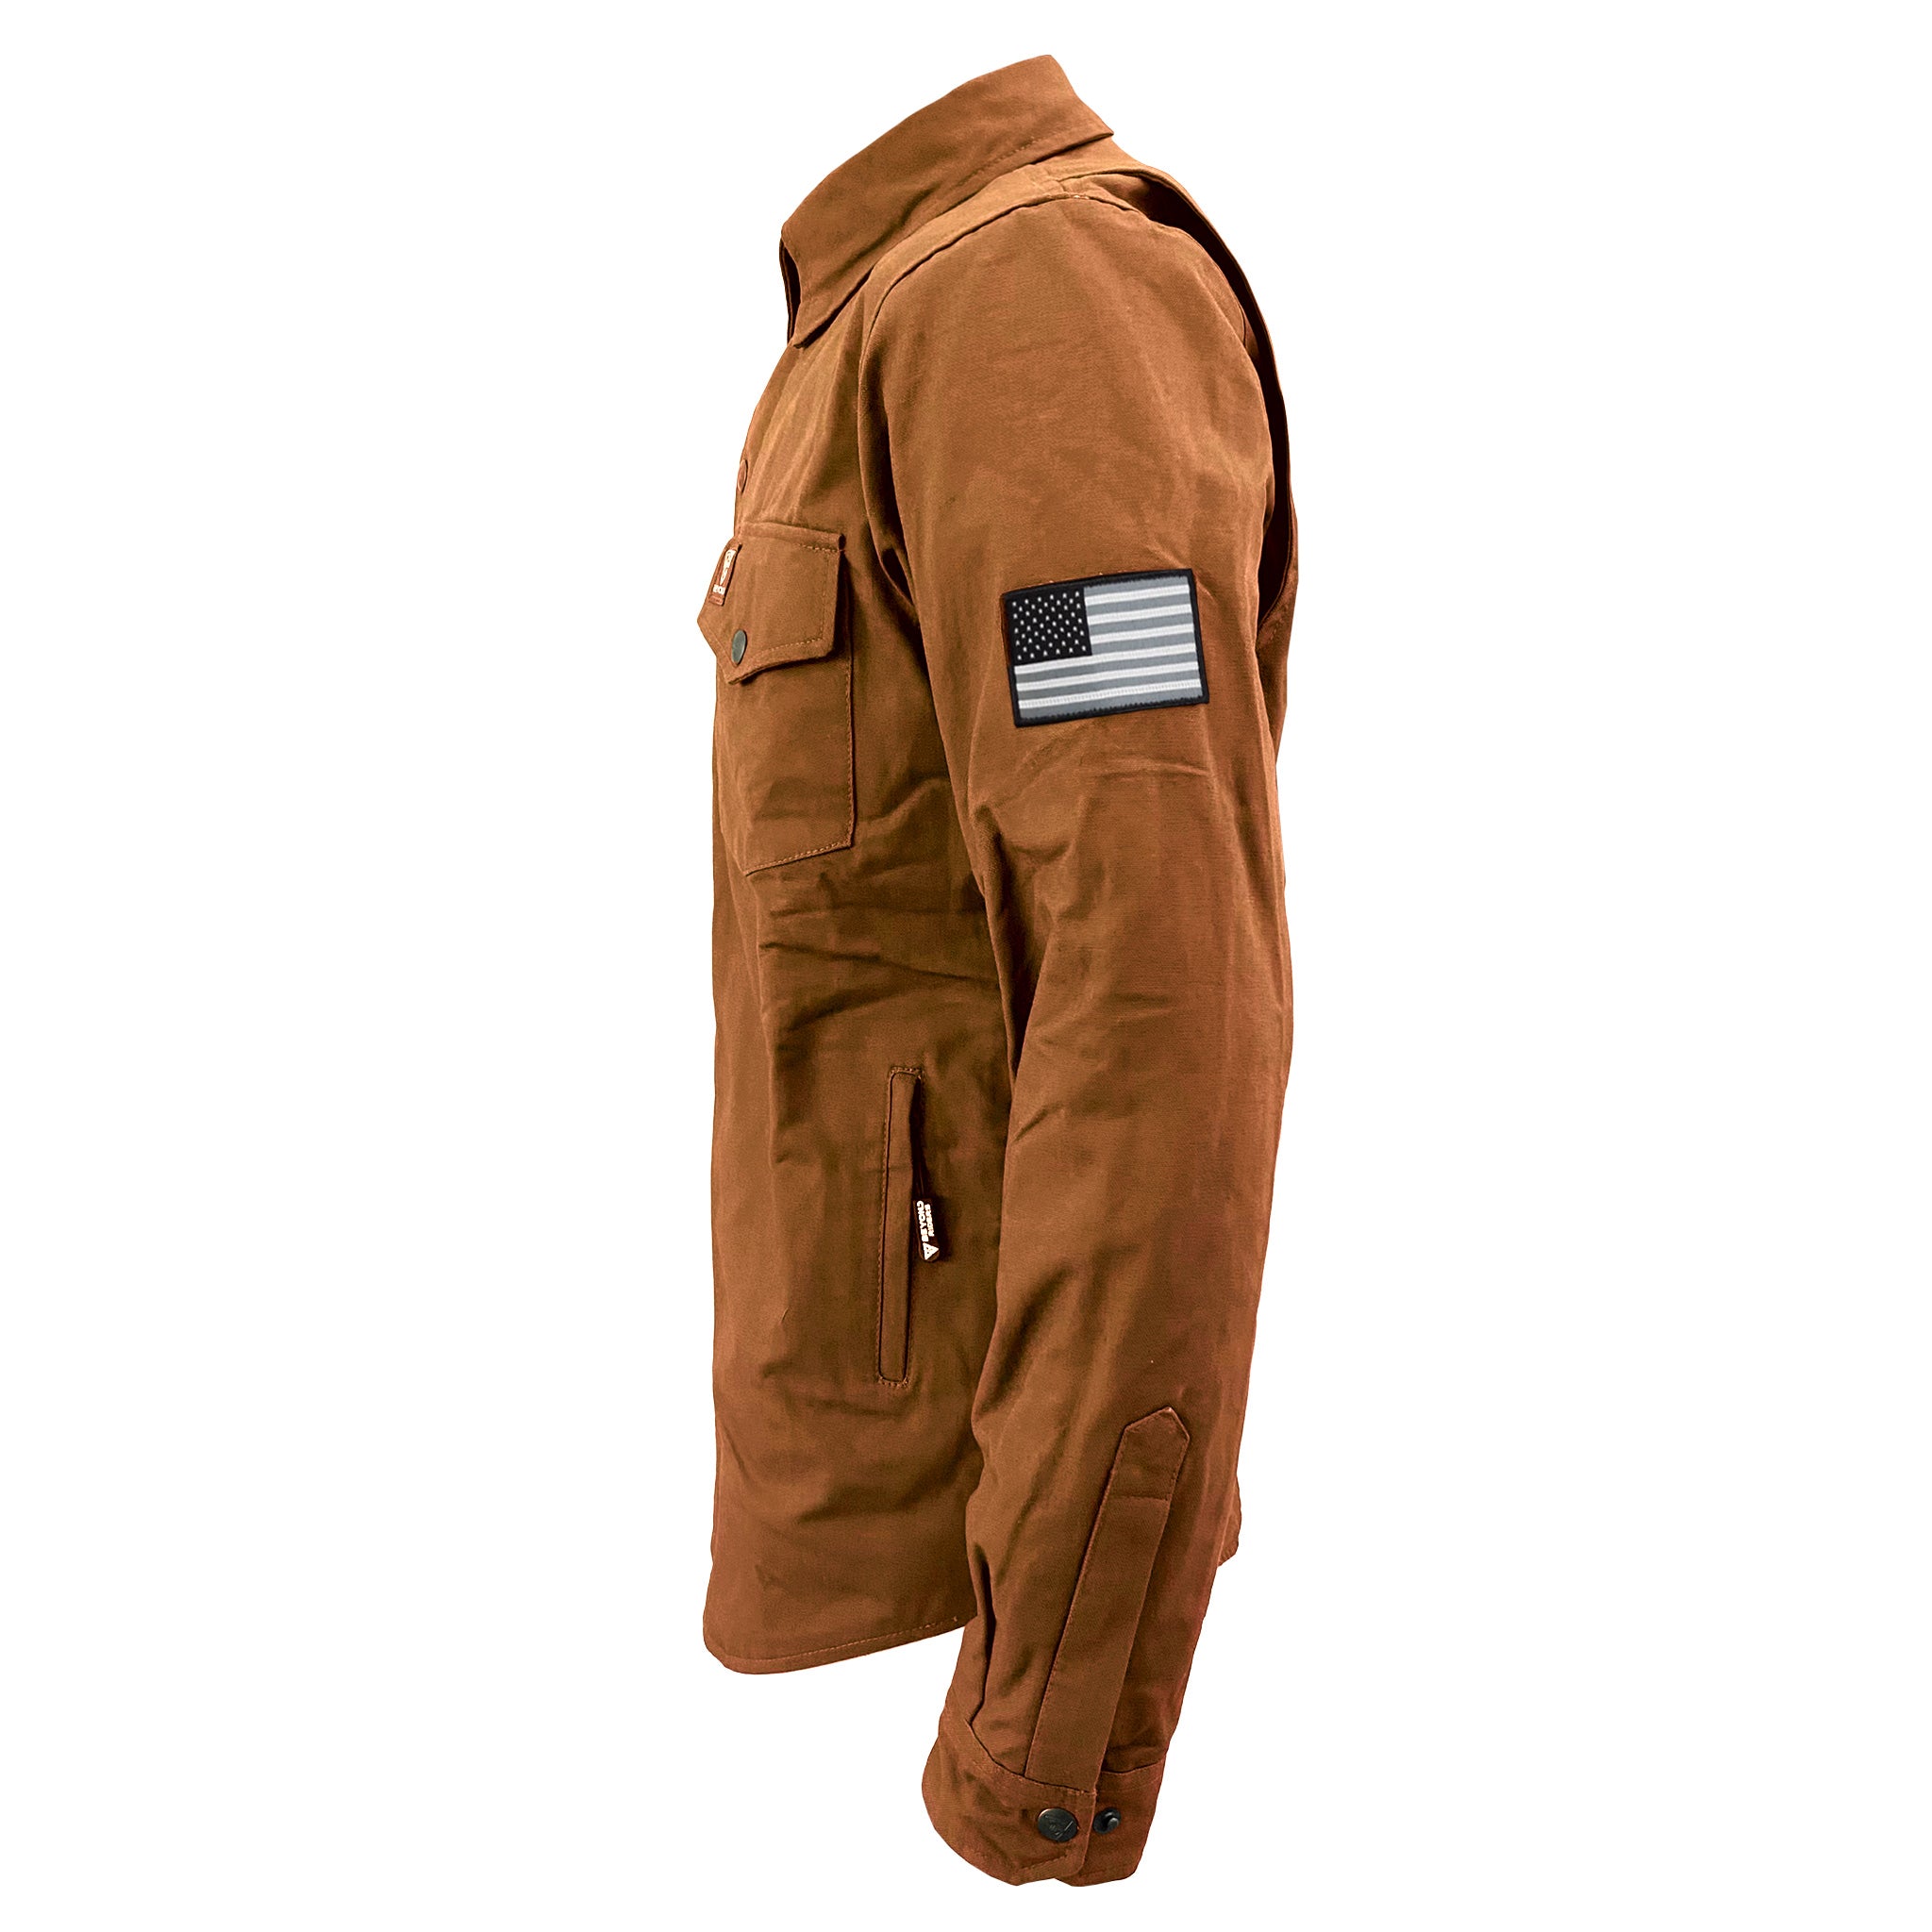 Protective Canvas Jacket for Men - Light Brown